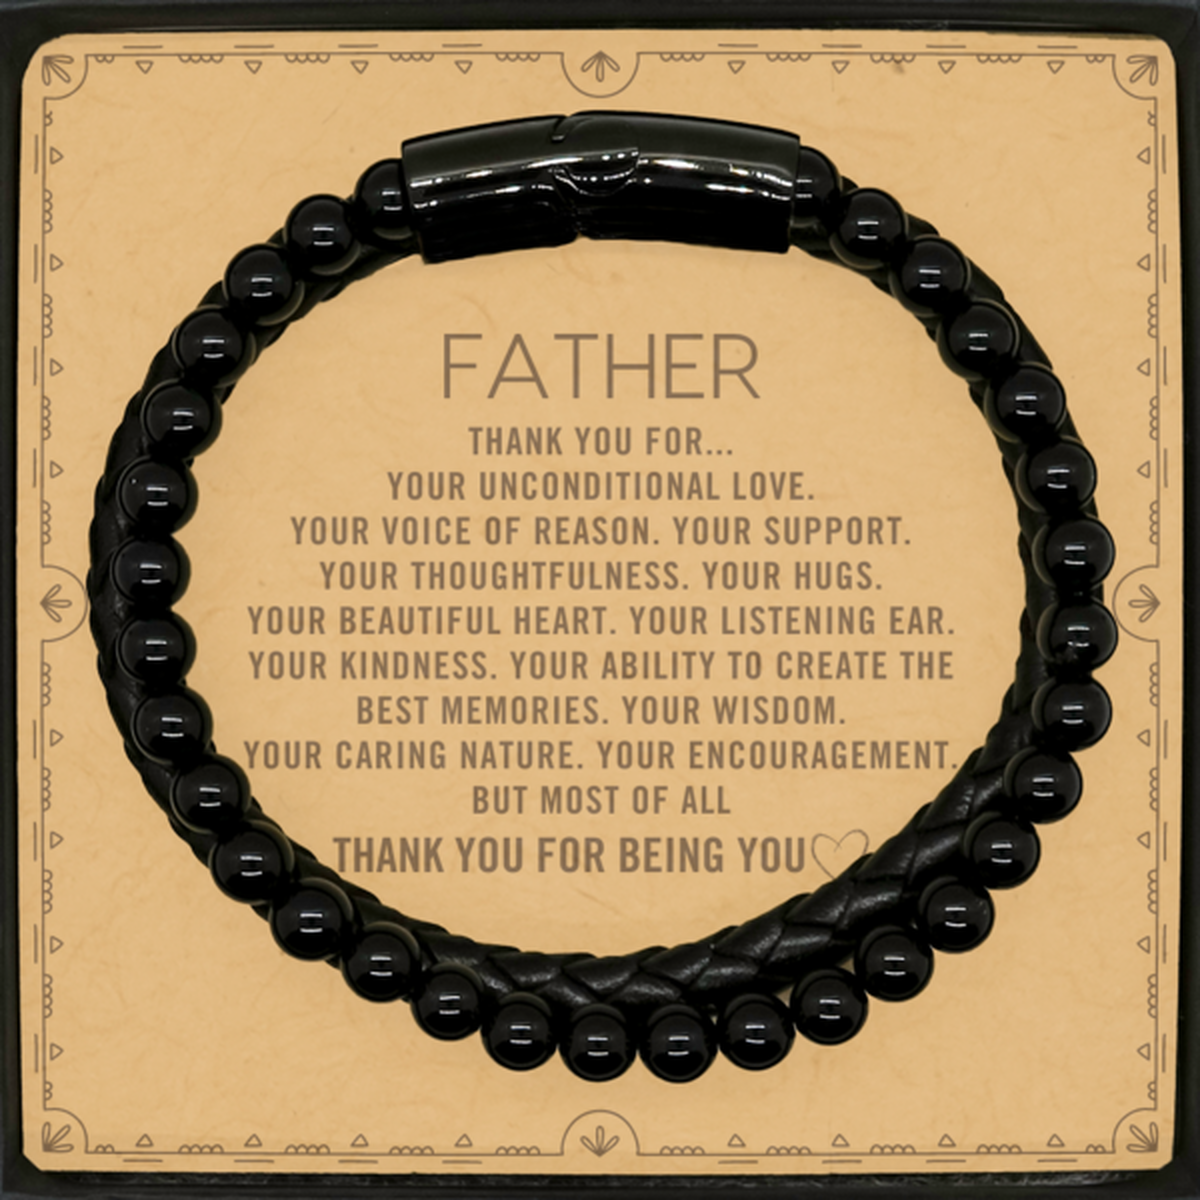 Father Stone Leather Bracelets Custom, Message Card Gifts For Father Christmas Graduation Birthday Gifts for Men Women Father Thank you for Your unconditional love